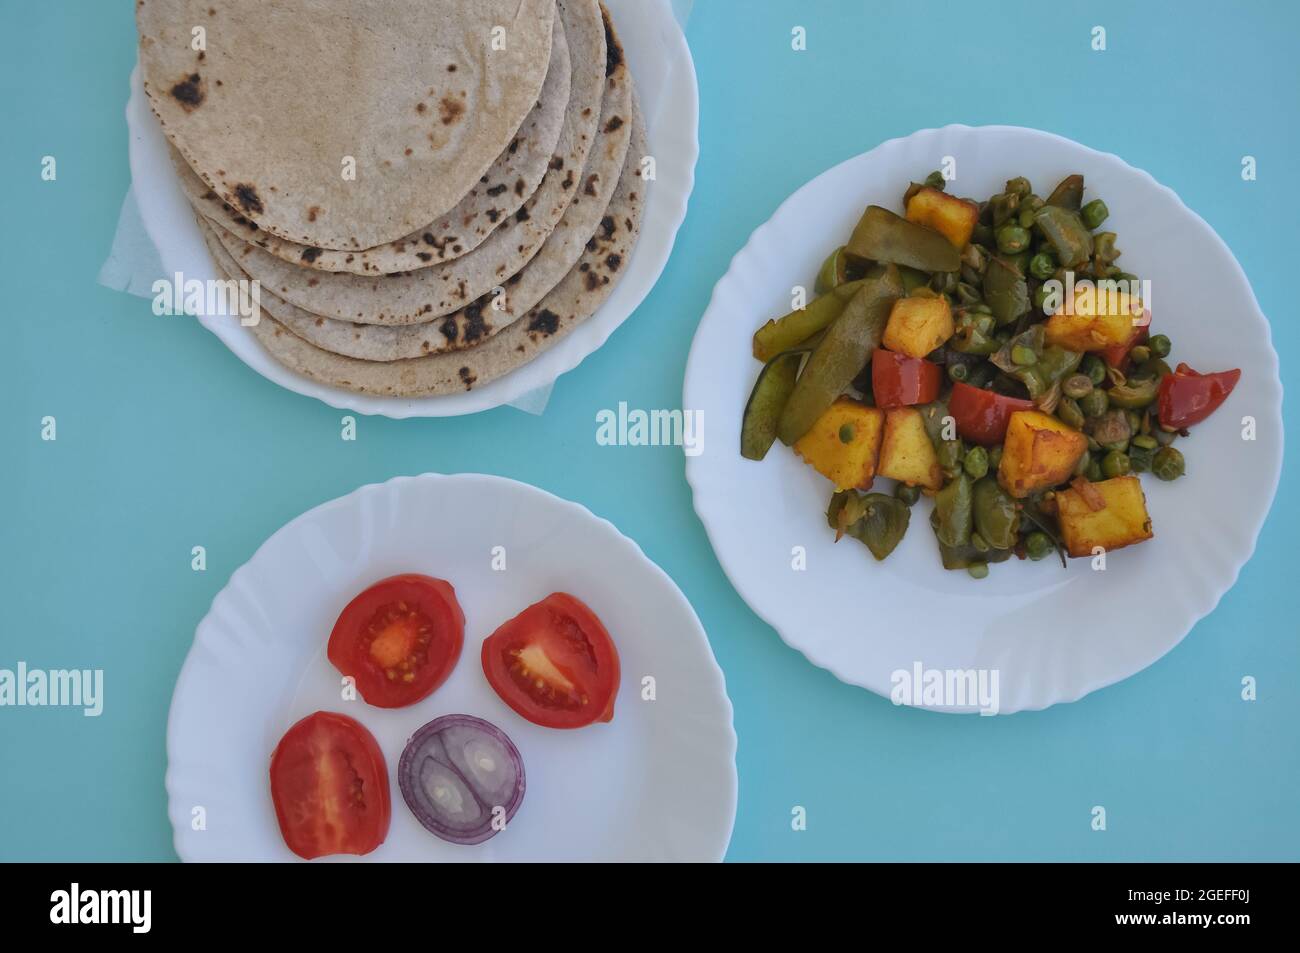 Indian Food - Matar paneer veg, roti and salad on white plate with light blue background Stock Photo